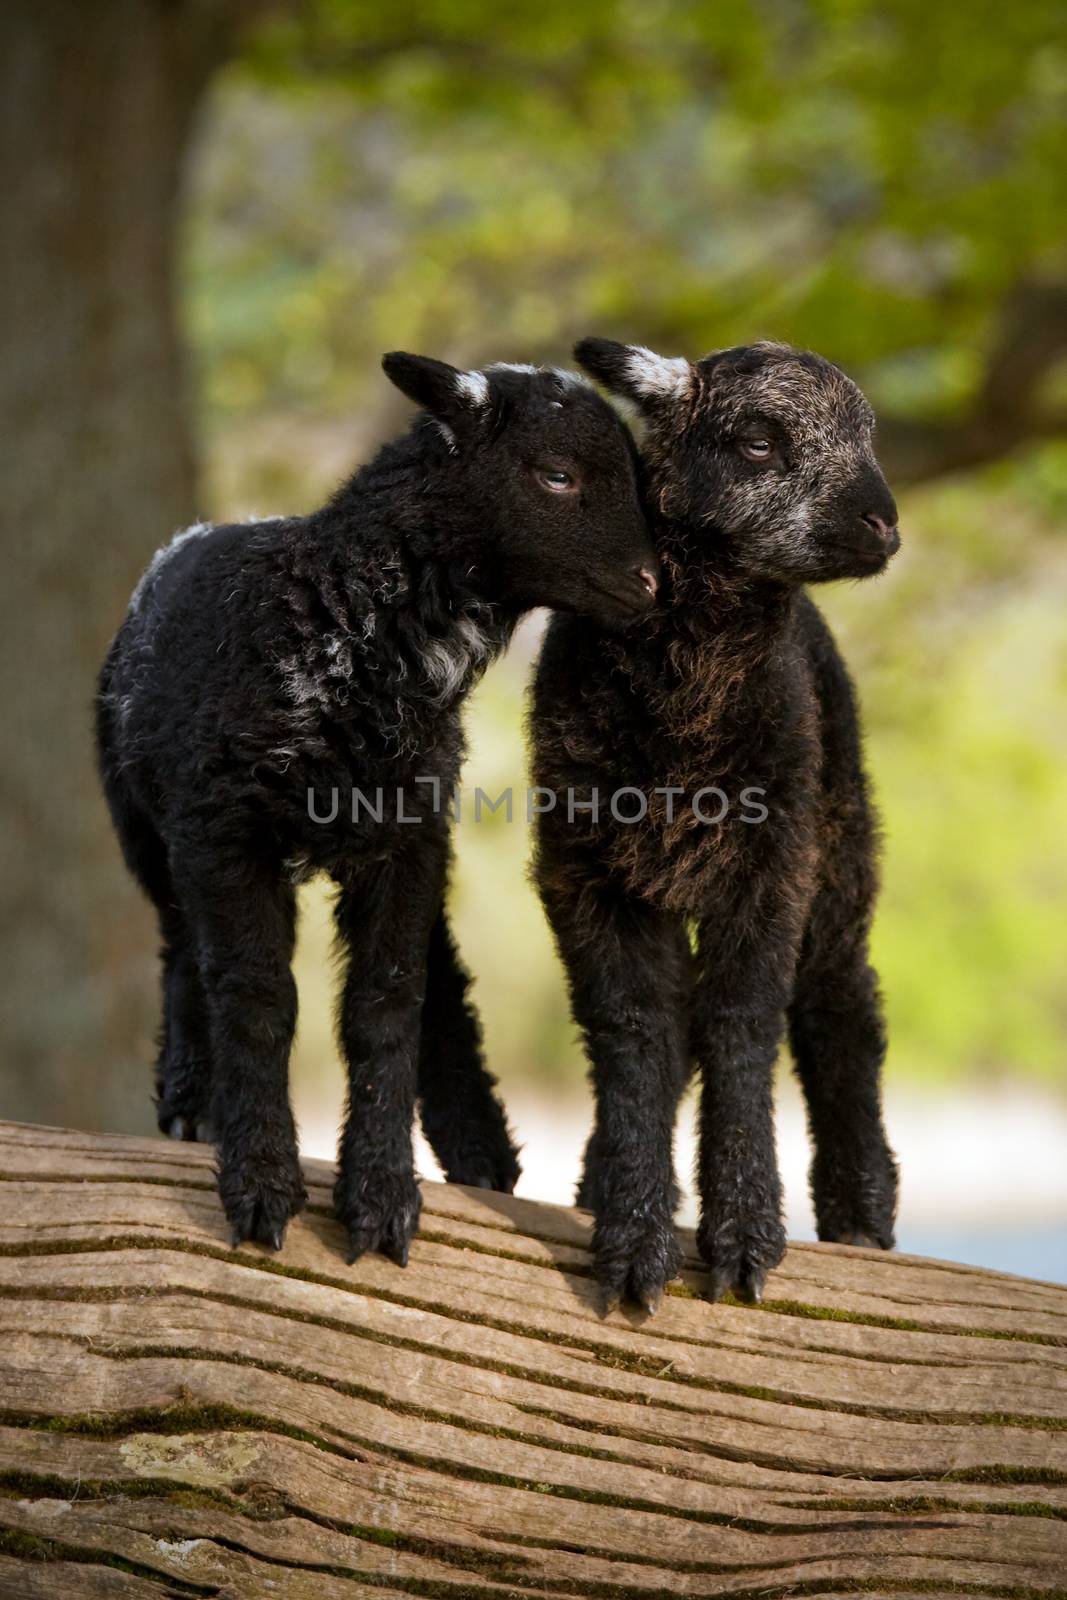 Two young lambs beside Derwentwater, Cumbria in the English Lake District.